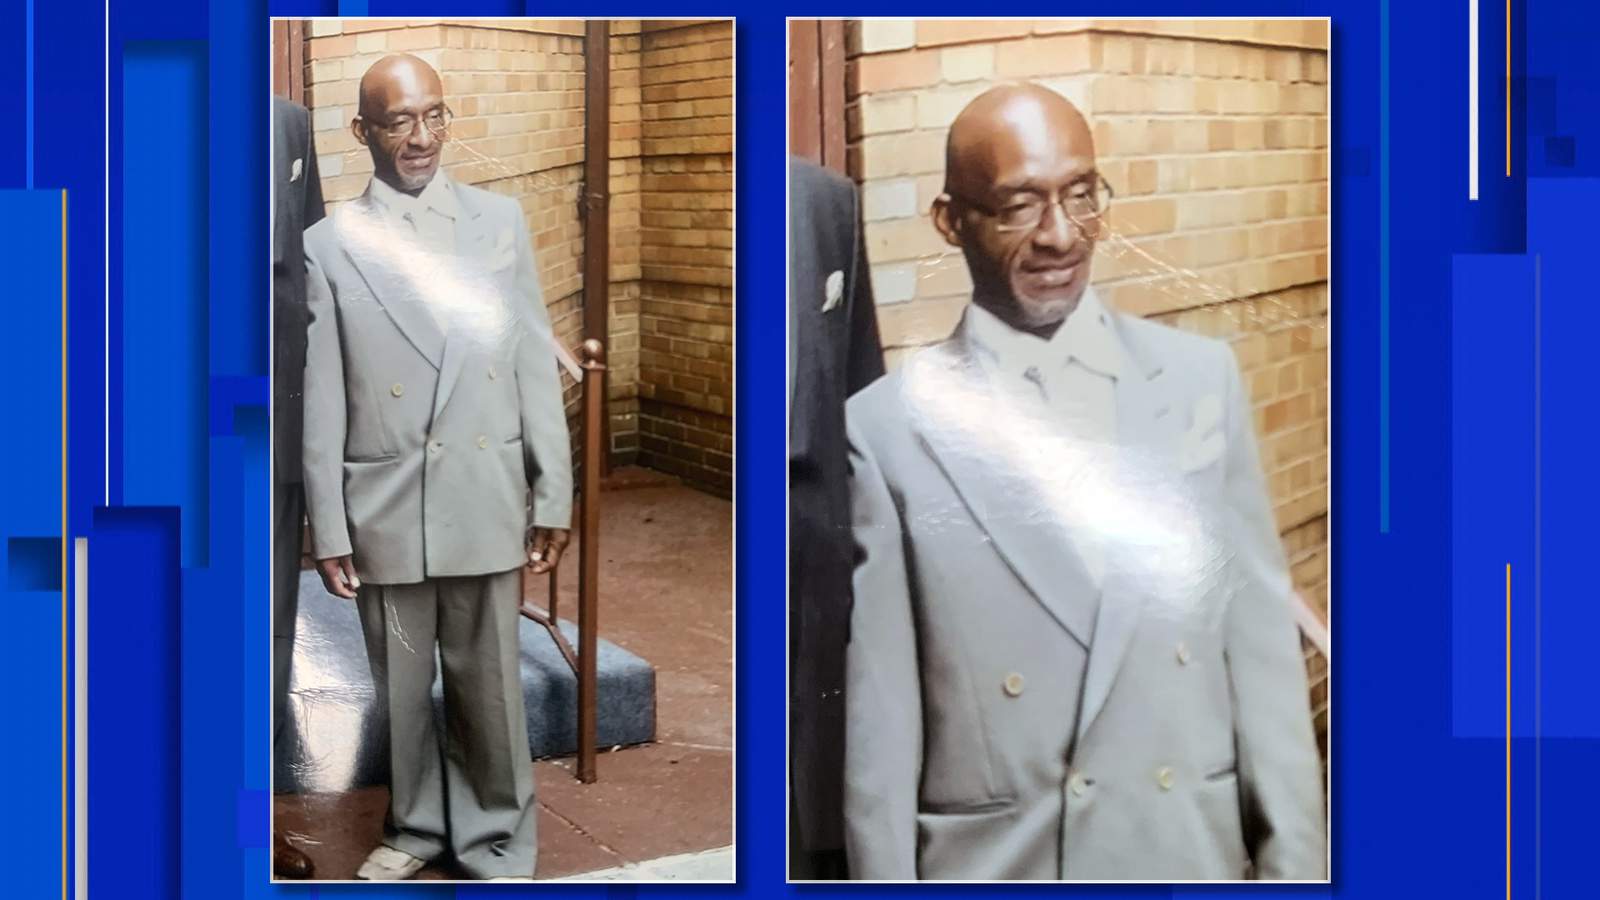 Detroit police search for missing 54-year-old man last seen March 24